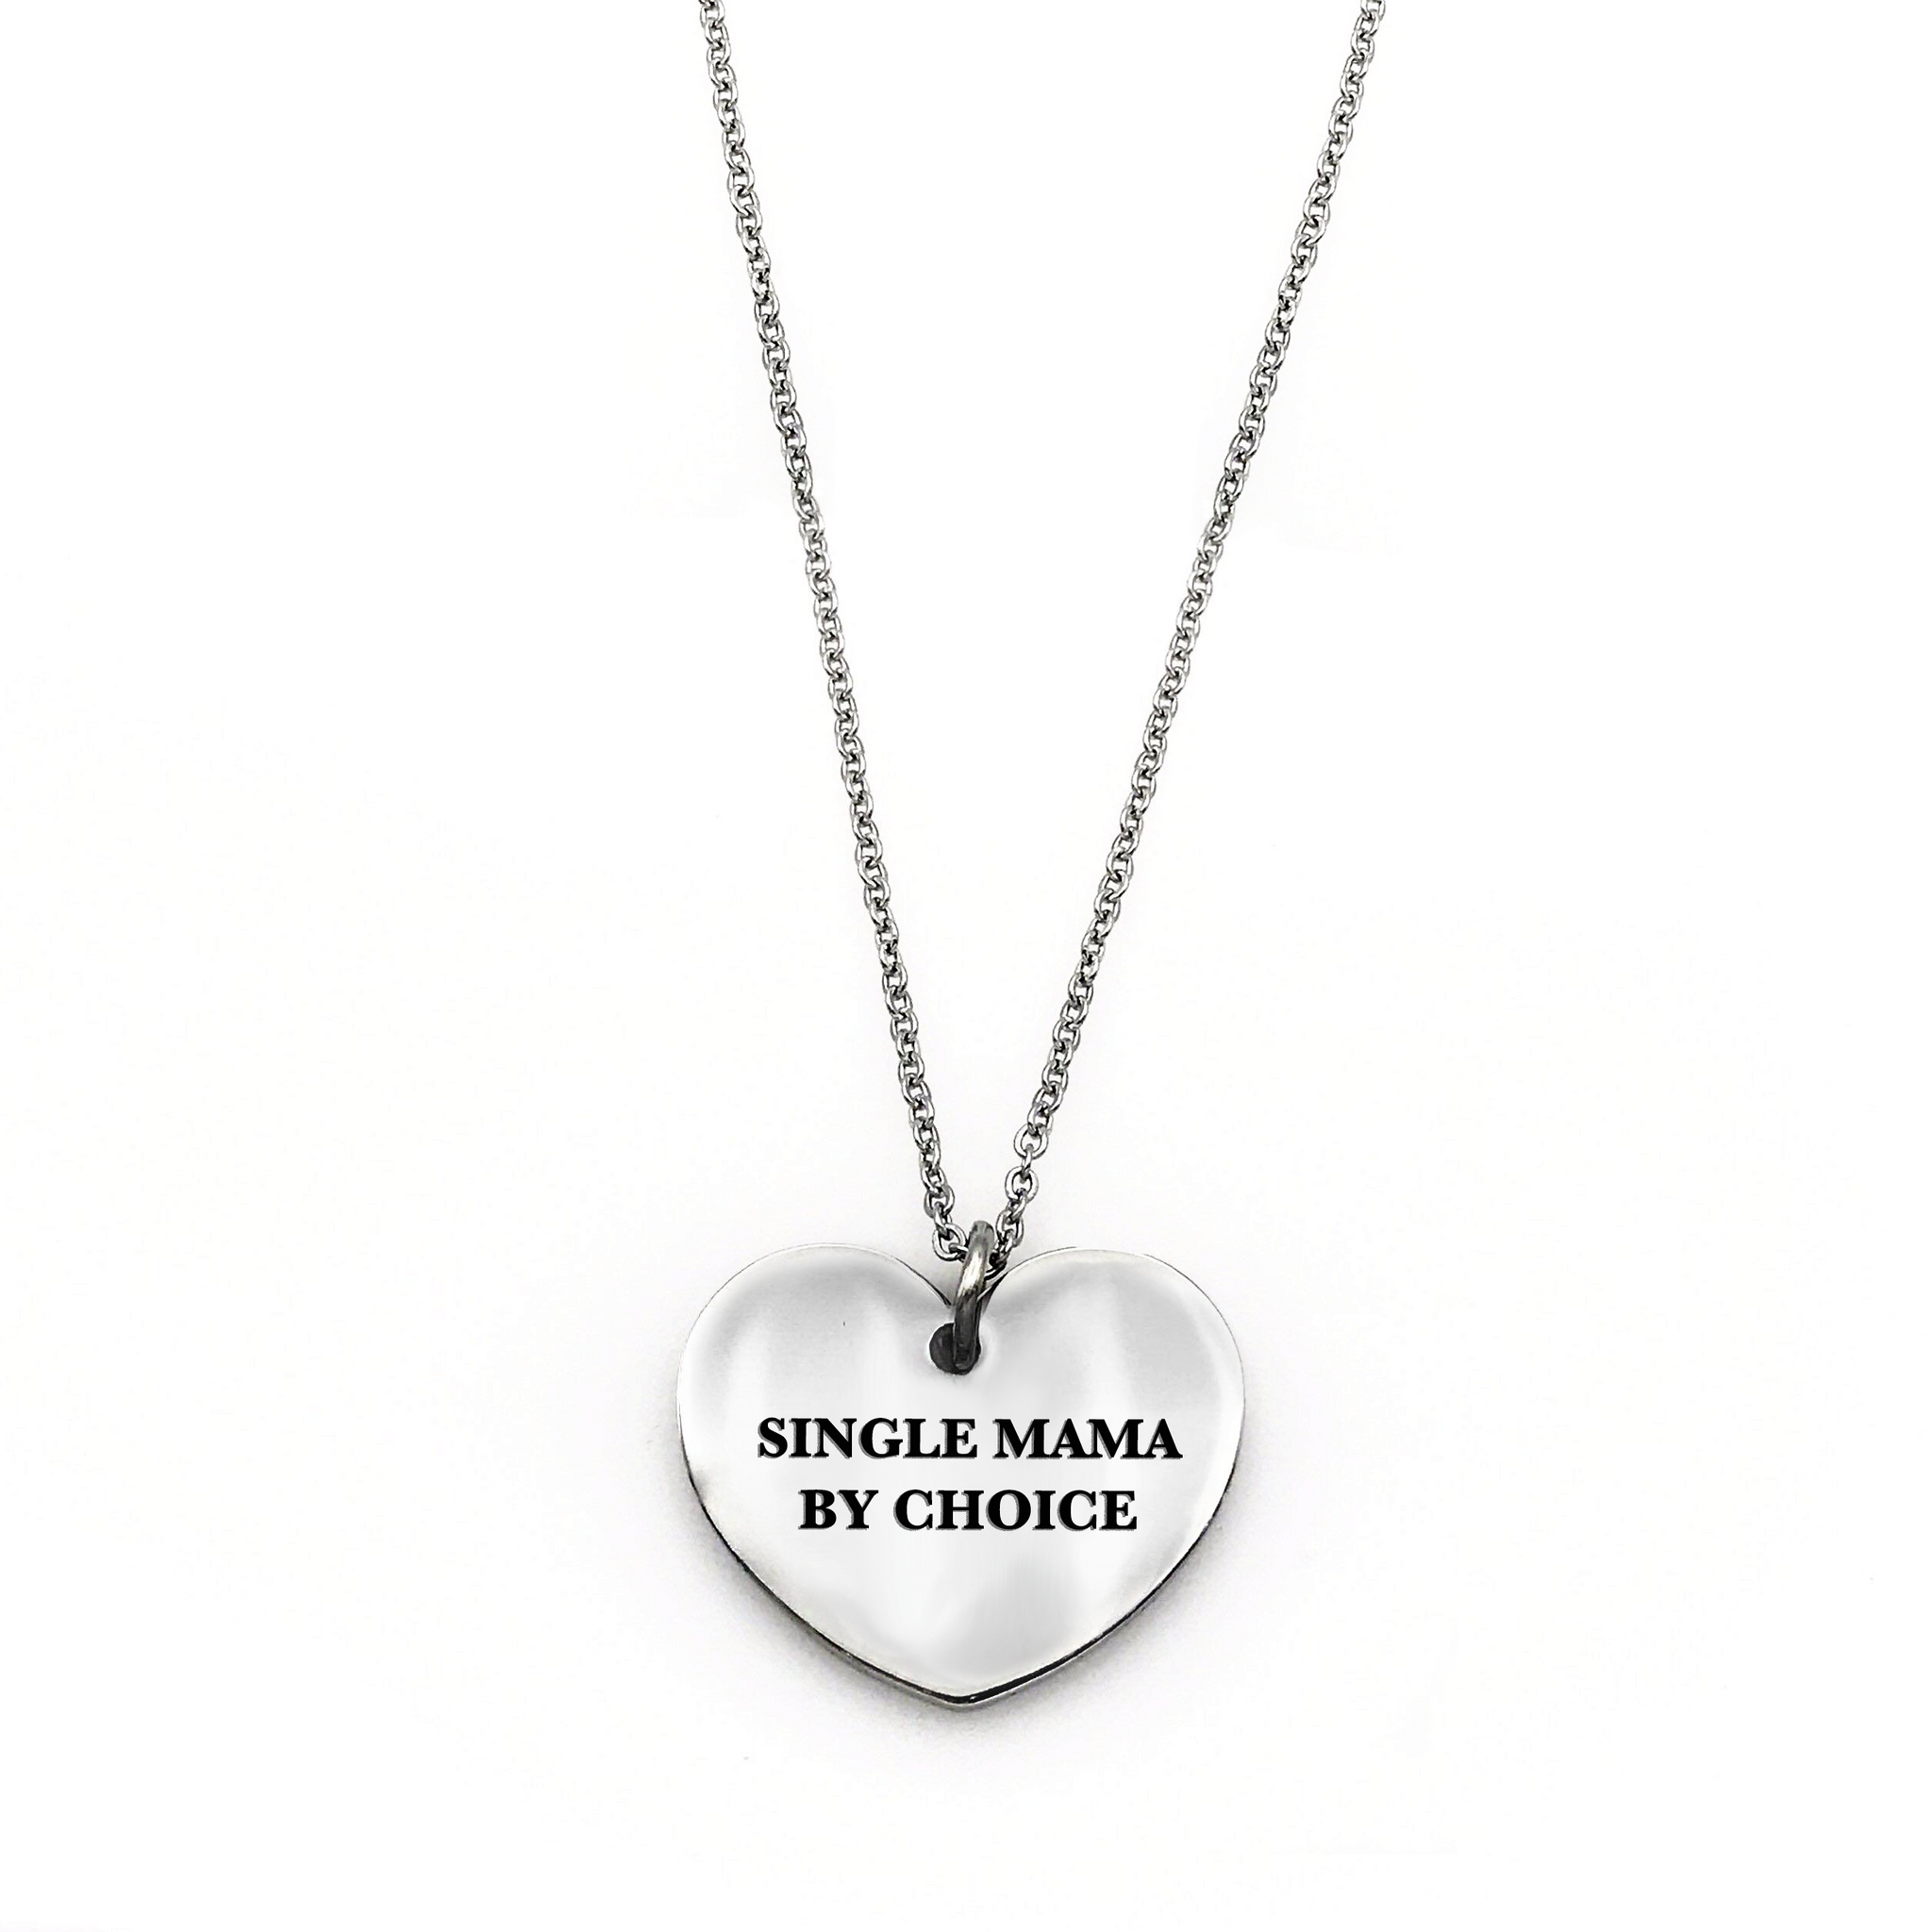 Single Mama by Choice Necklace